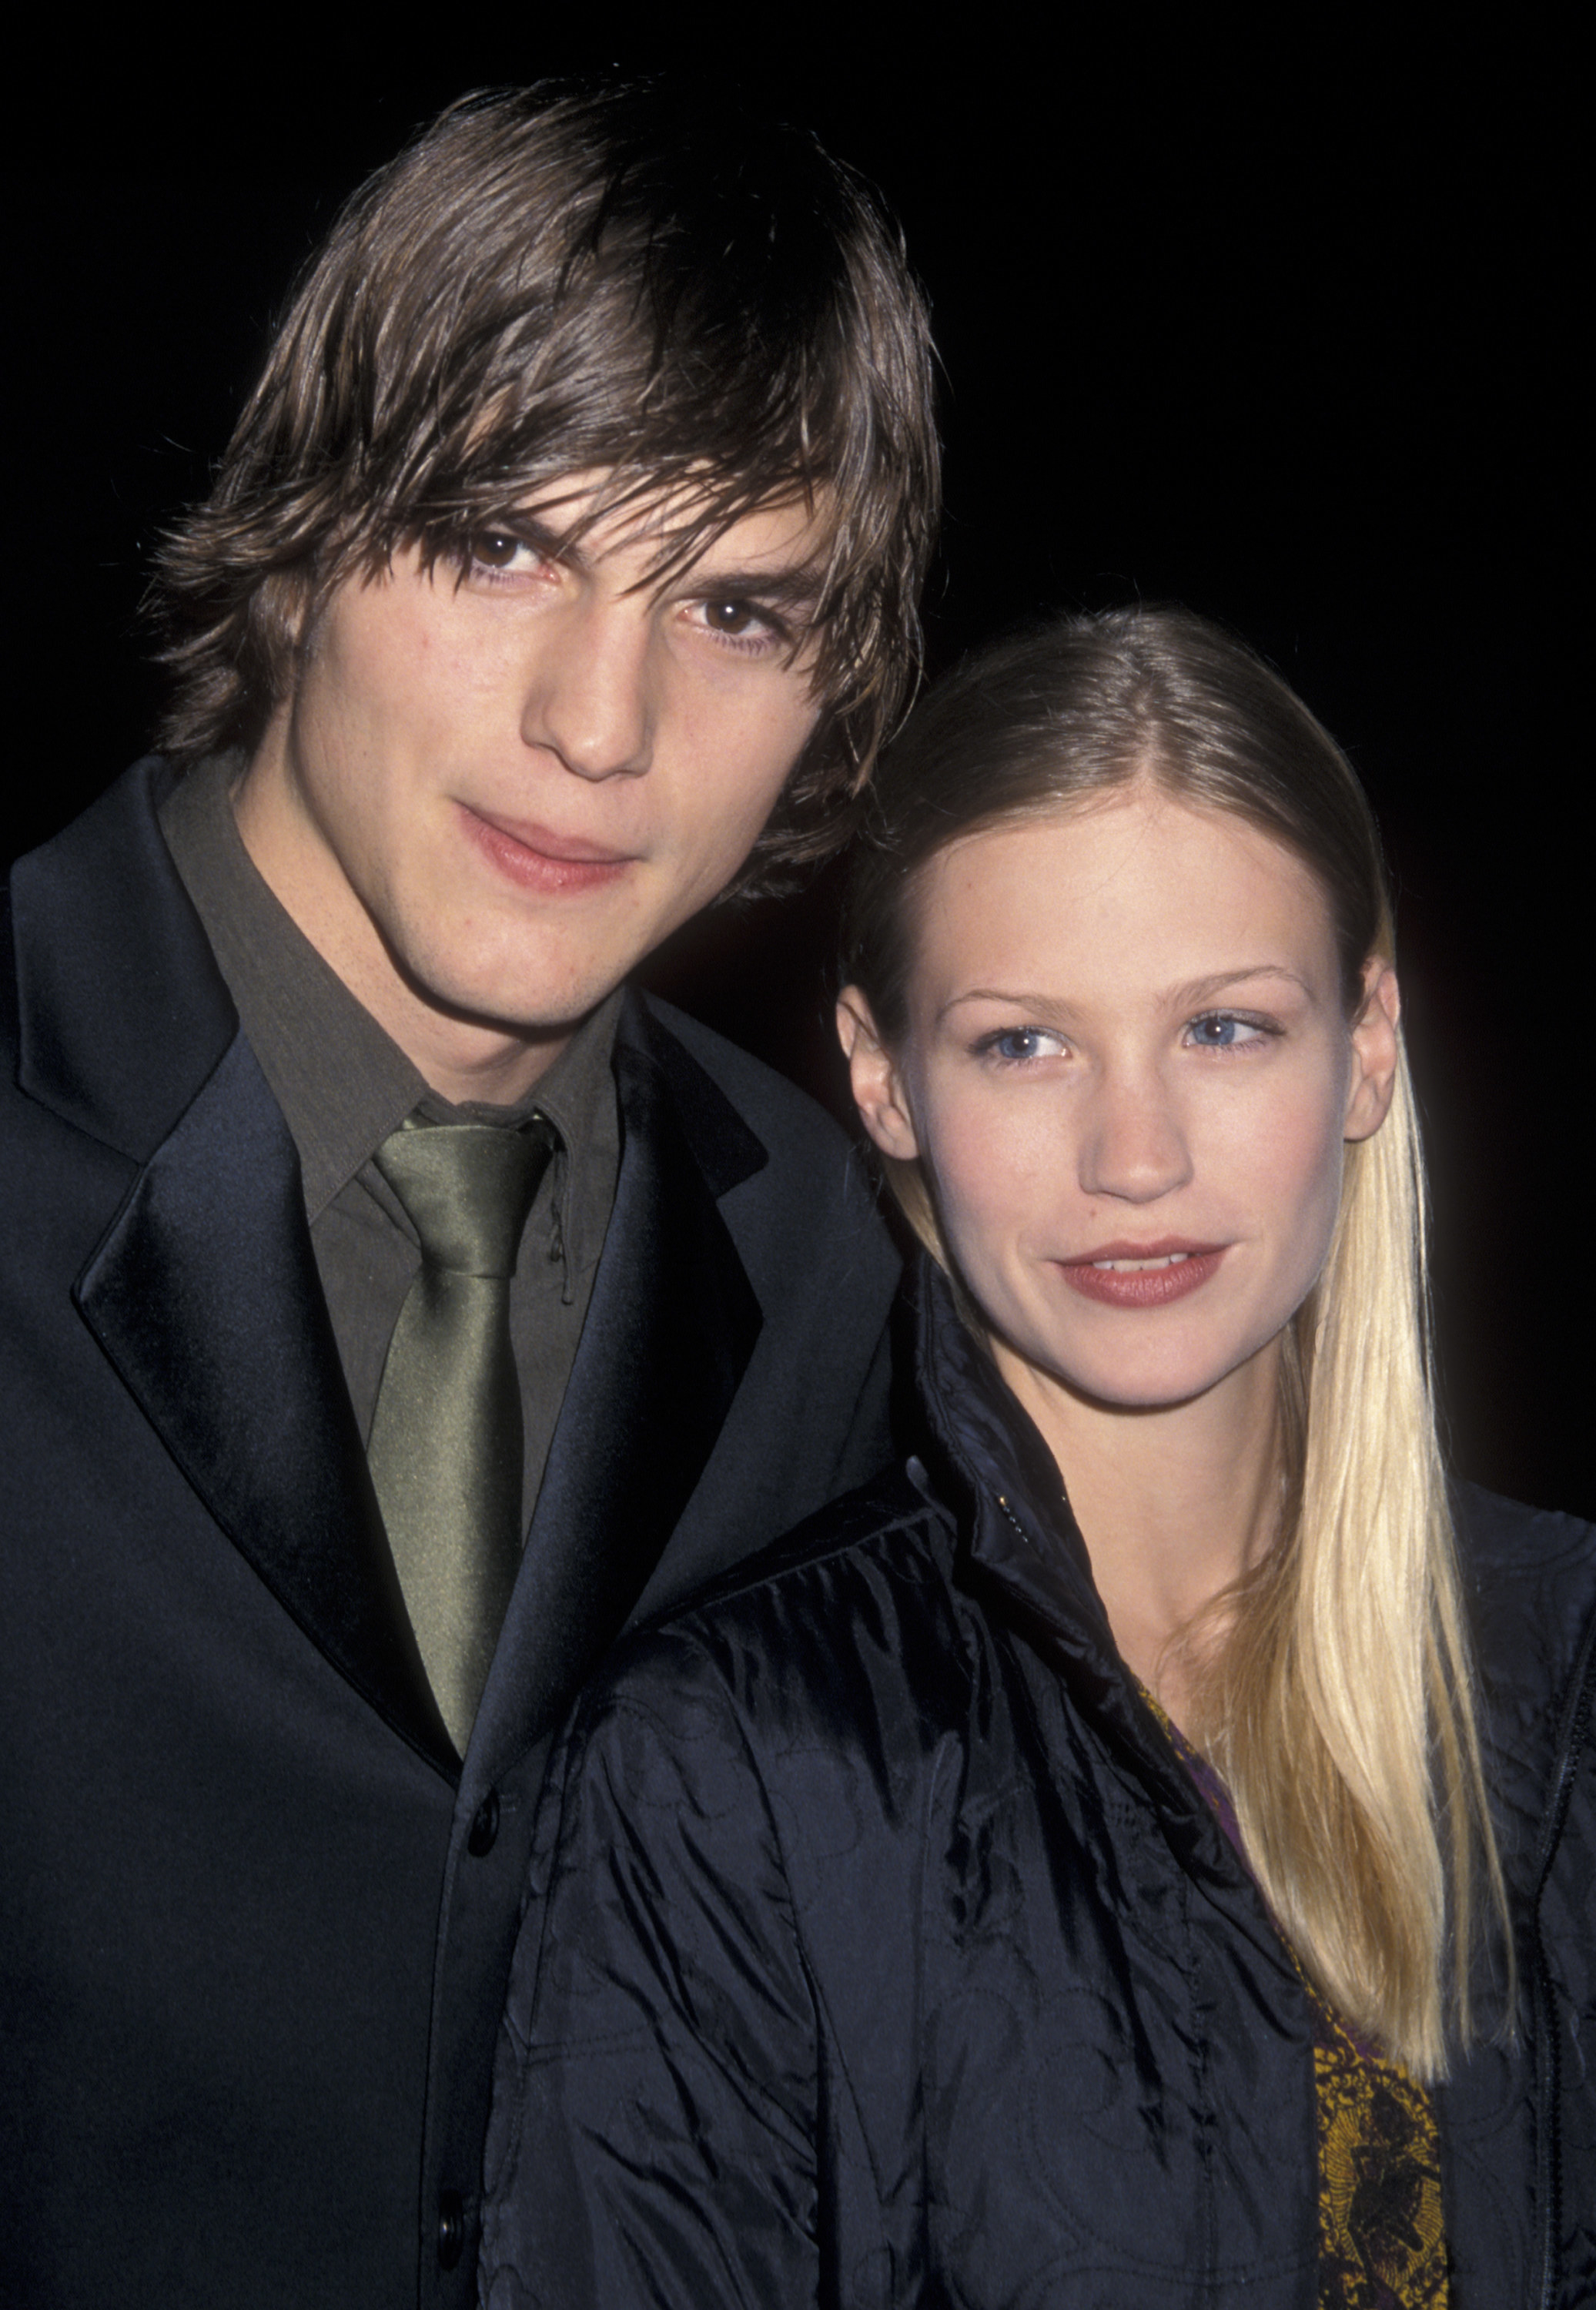 Ashton Kutcher with a shaggy haircut and dark suit, and tie standing next to January Jones who&#x27;s wearing a dark jacket at the premiere of Reindeer Games